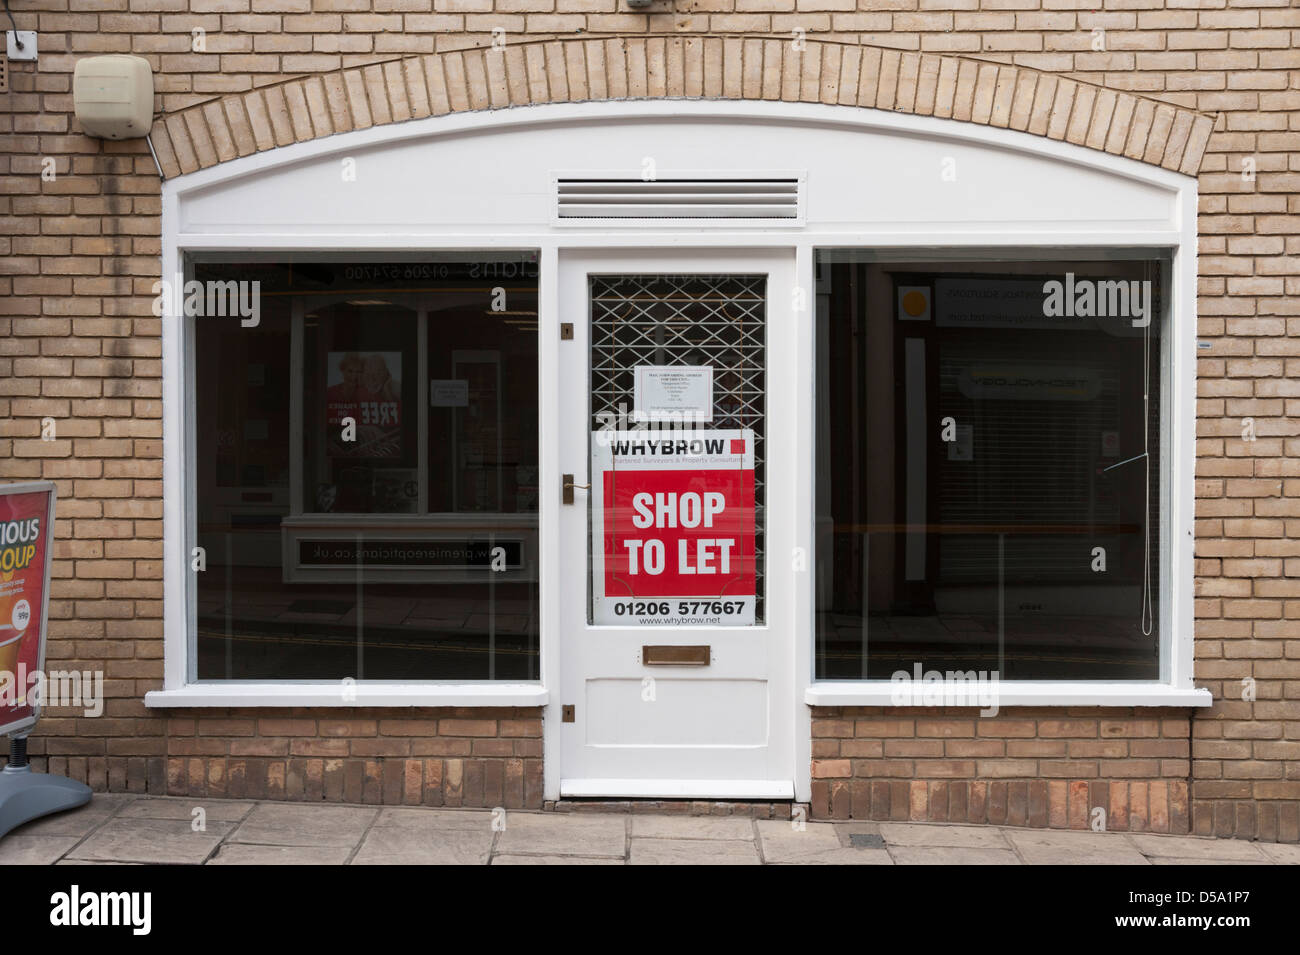 Shop to let with sign in the window in Colchester UK Stock Photo